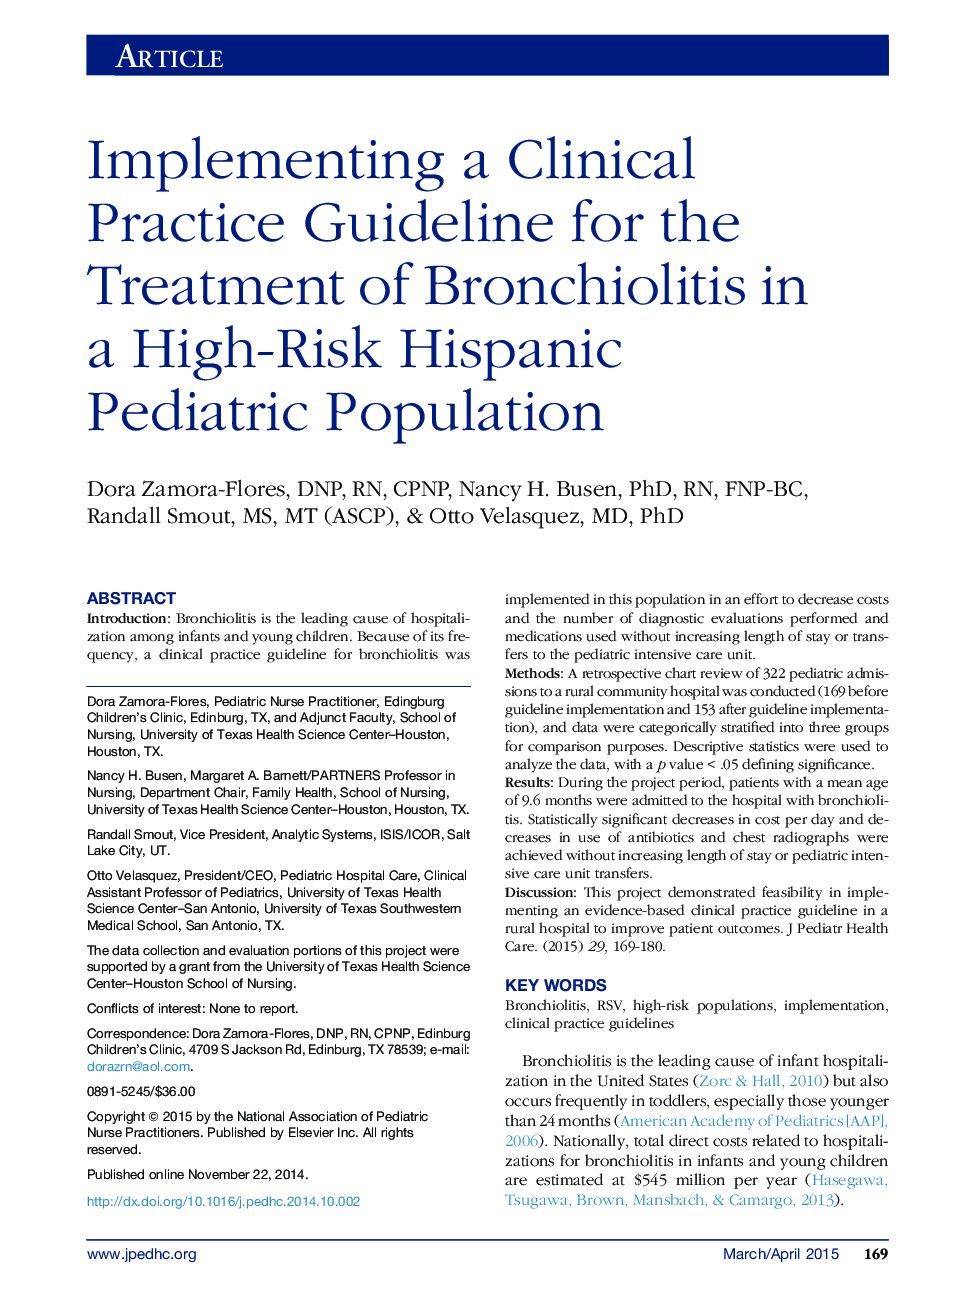 Implementing a Clinical Practice Guideline for the Treatment of Bronchiolitis in a High-Risk Hispanic Pediatric Population 